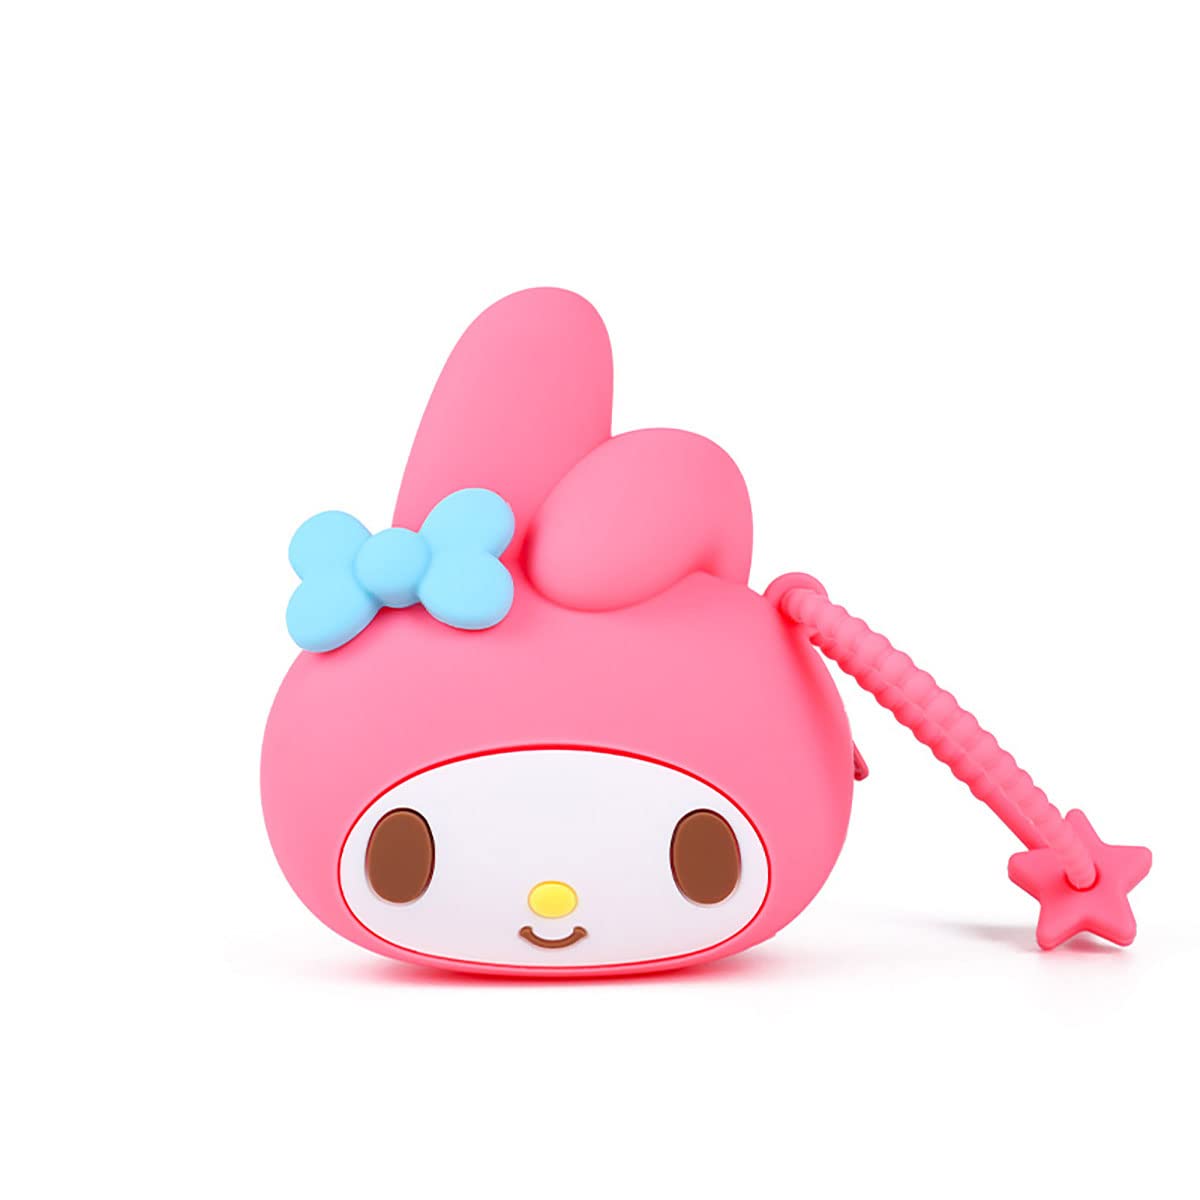 Cute Coin Purse Keychain, Small Coin Purse for Women, Bunny Coin Purse, Bunny Silicone Pouch, Kawaii Coin Purse Pouch, Coin Pouch for Backpack Decoration